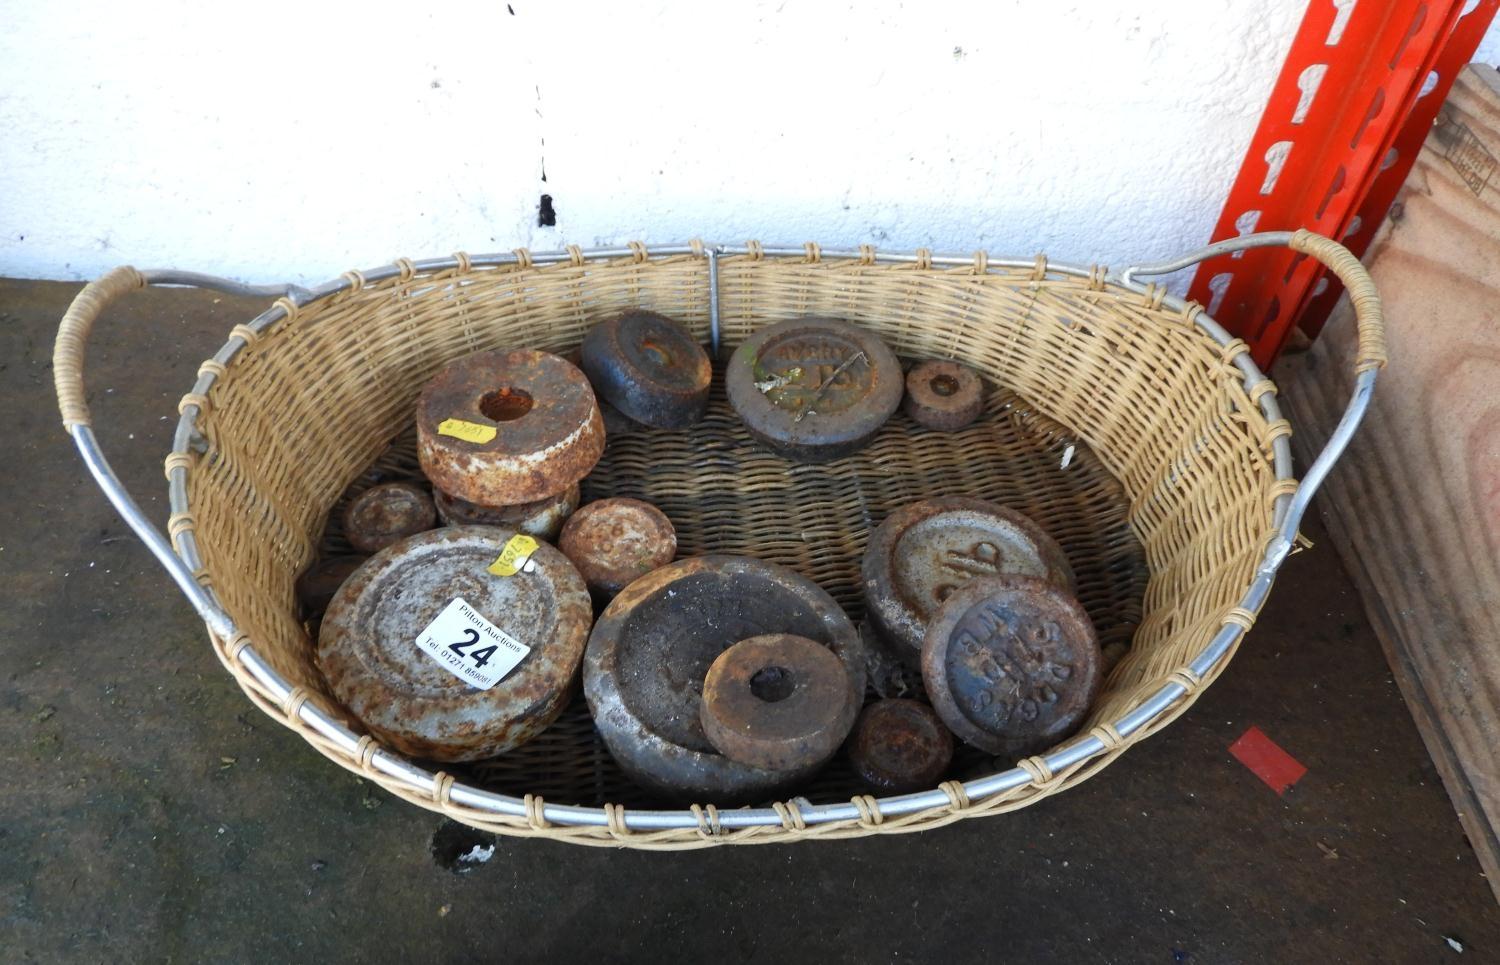 Basket and Contents - Weights